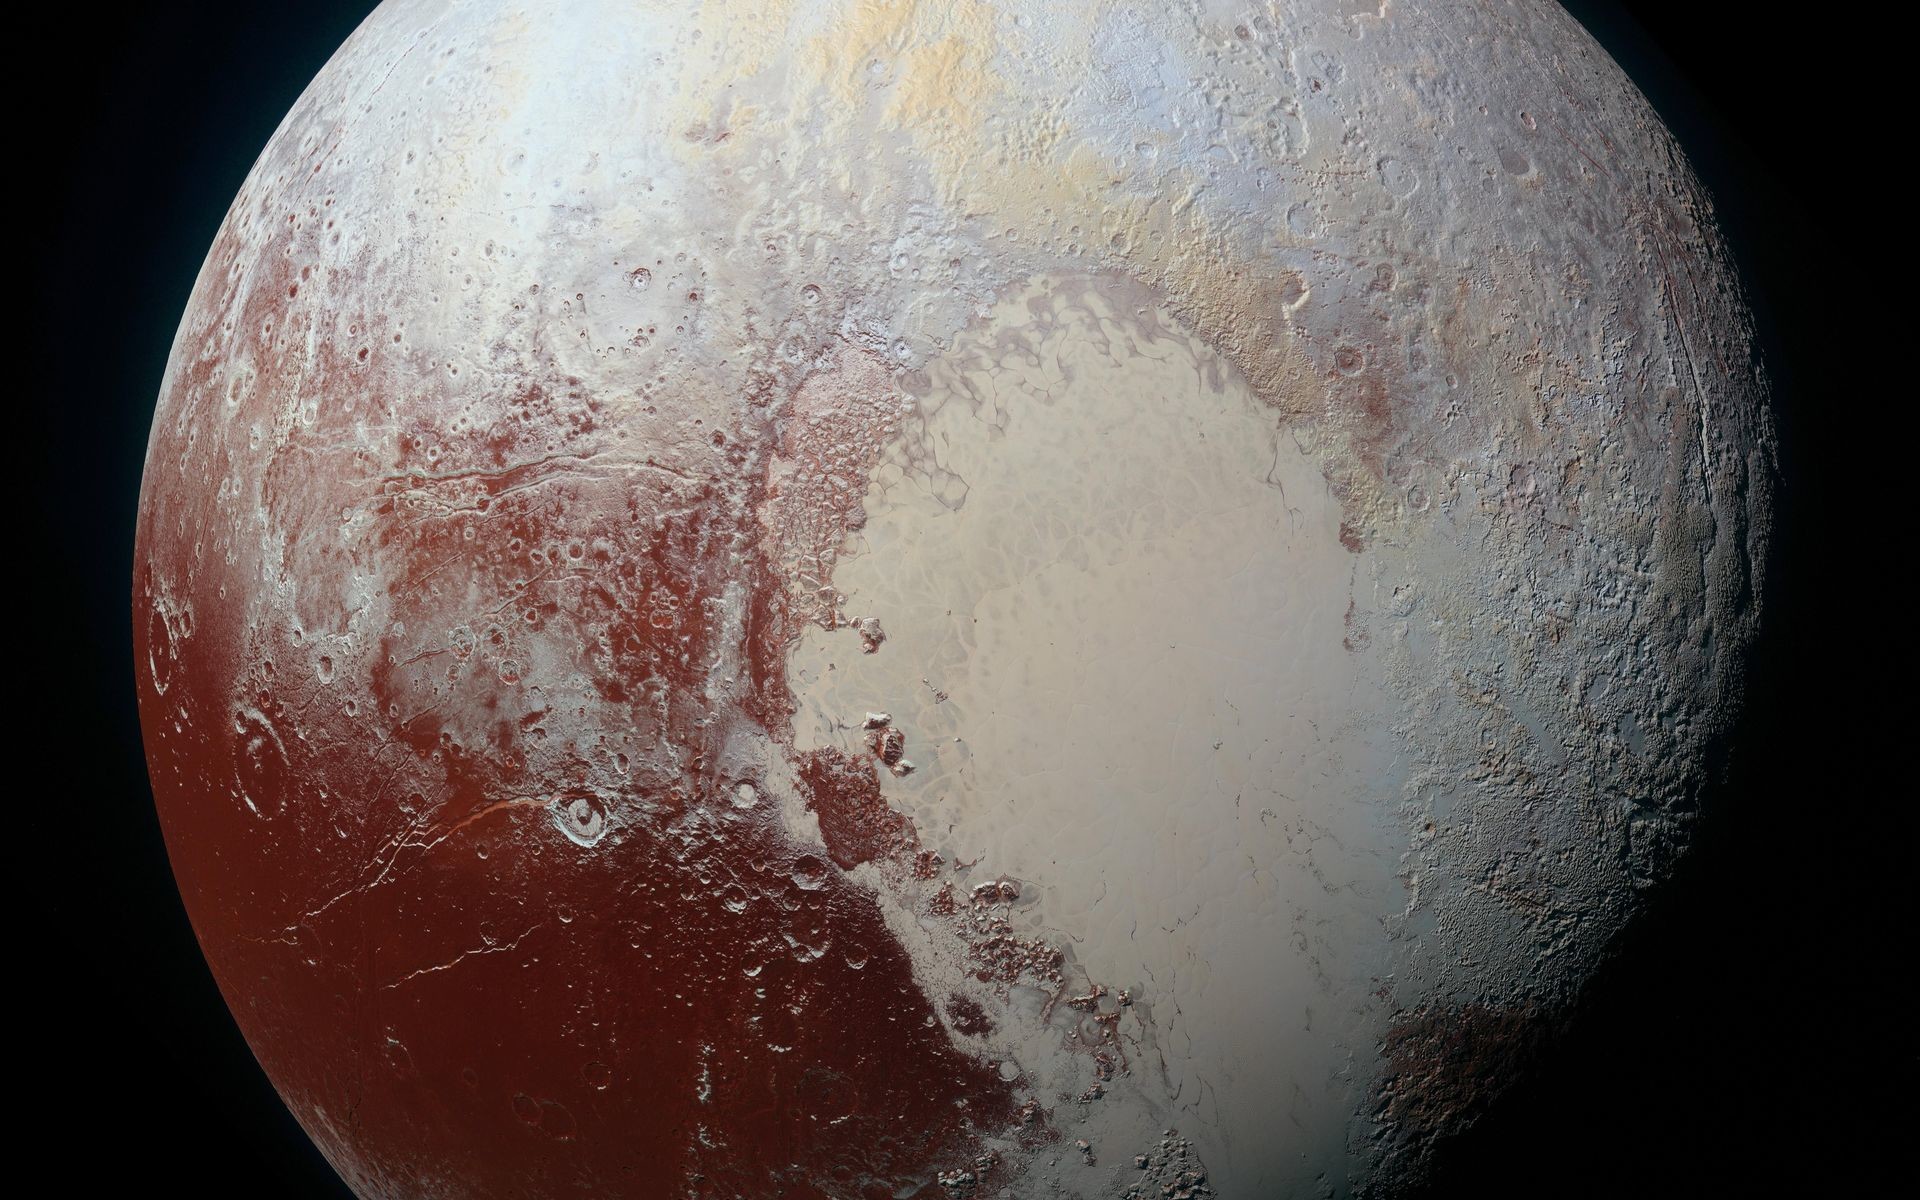 NASAs New Horizons spacecraft captured this high resolution enhanced color view of Pluto on July